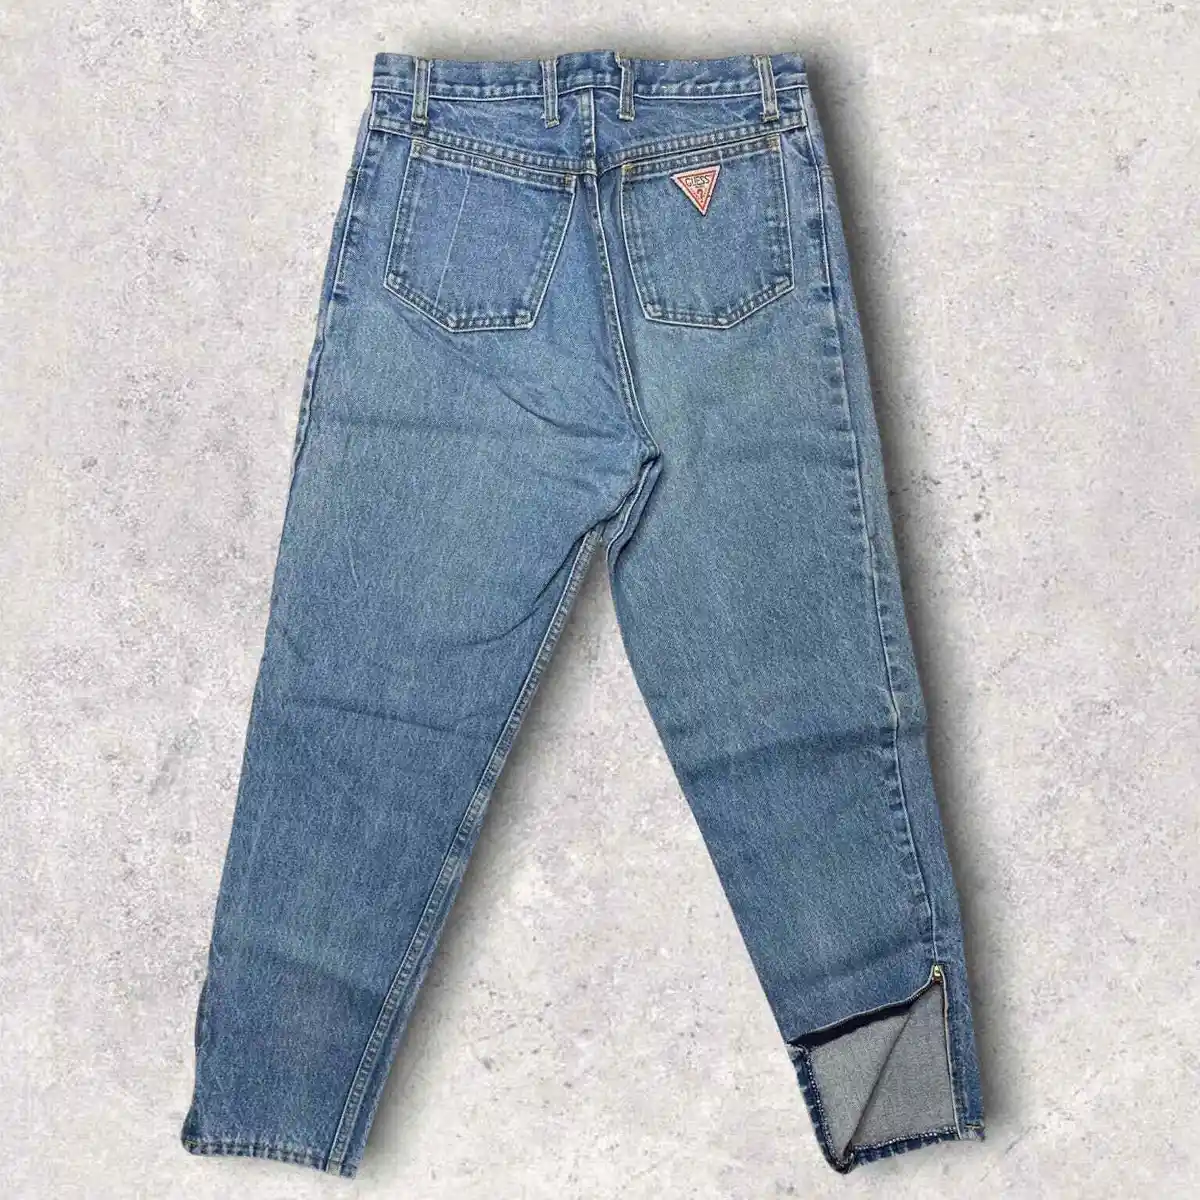 Vintage Guess Tapered Fit Jeans Mens 28x28 Style 1015 Zipper Ankles 1980s |